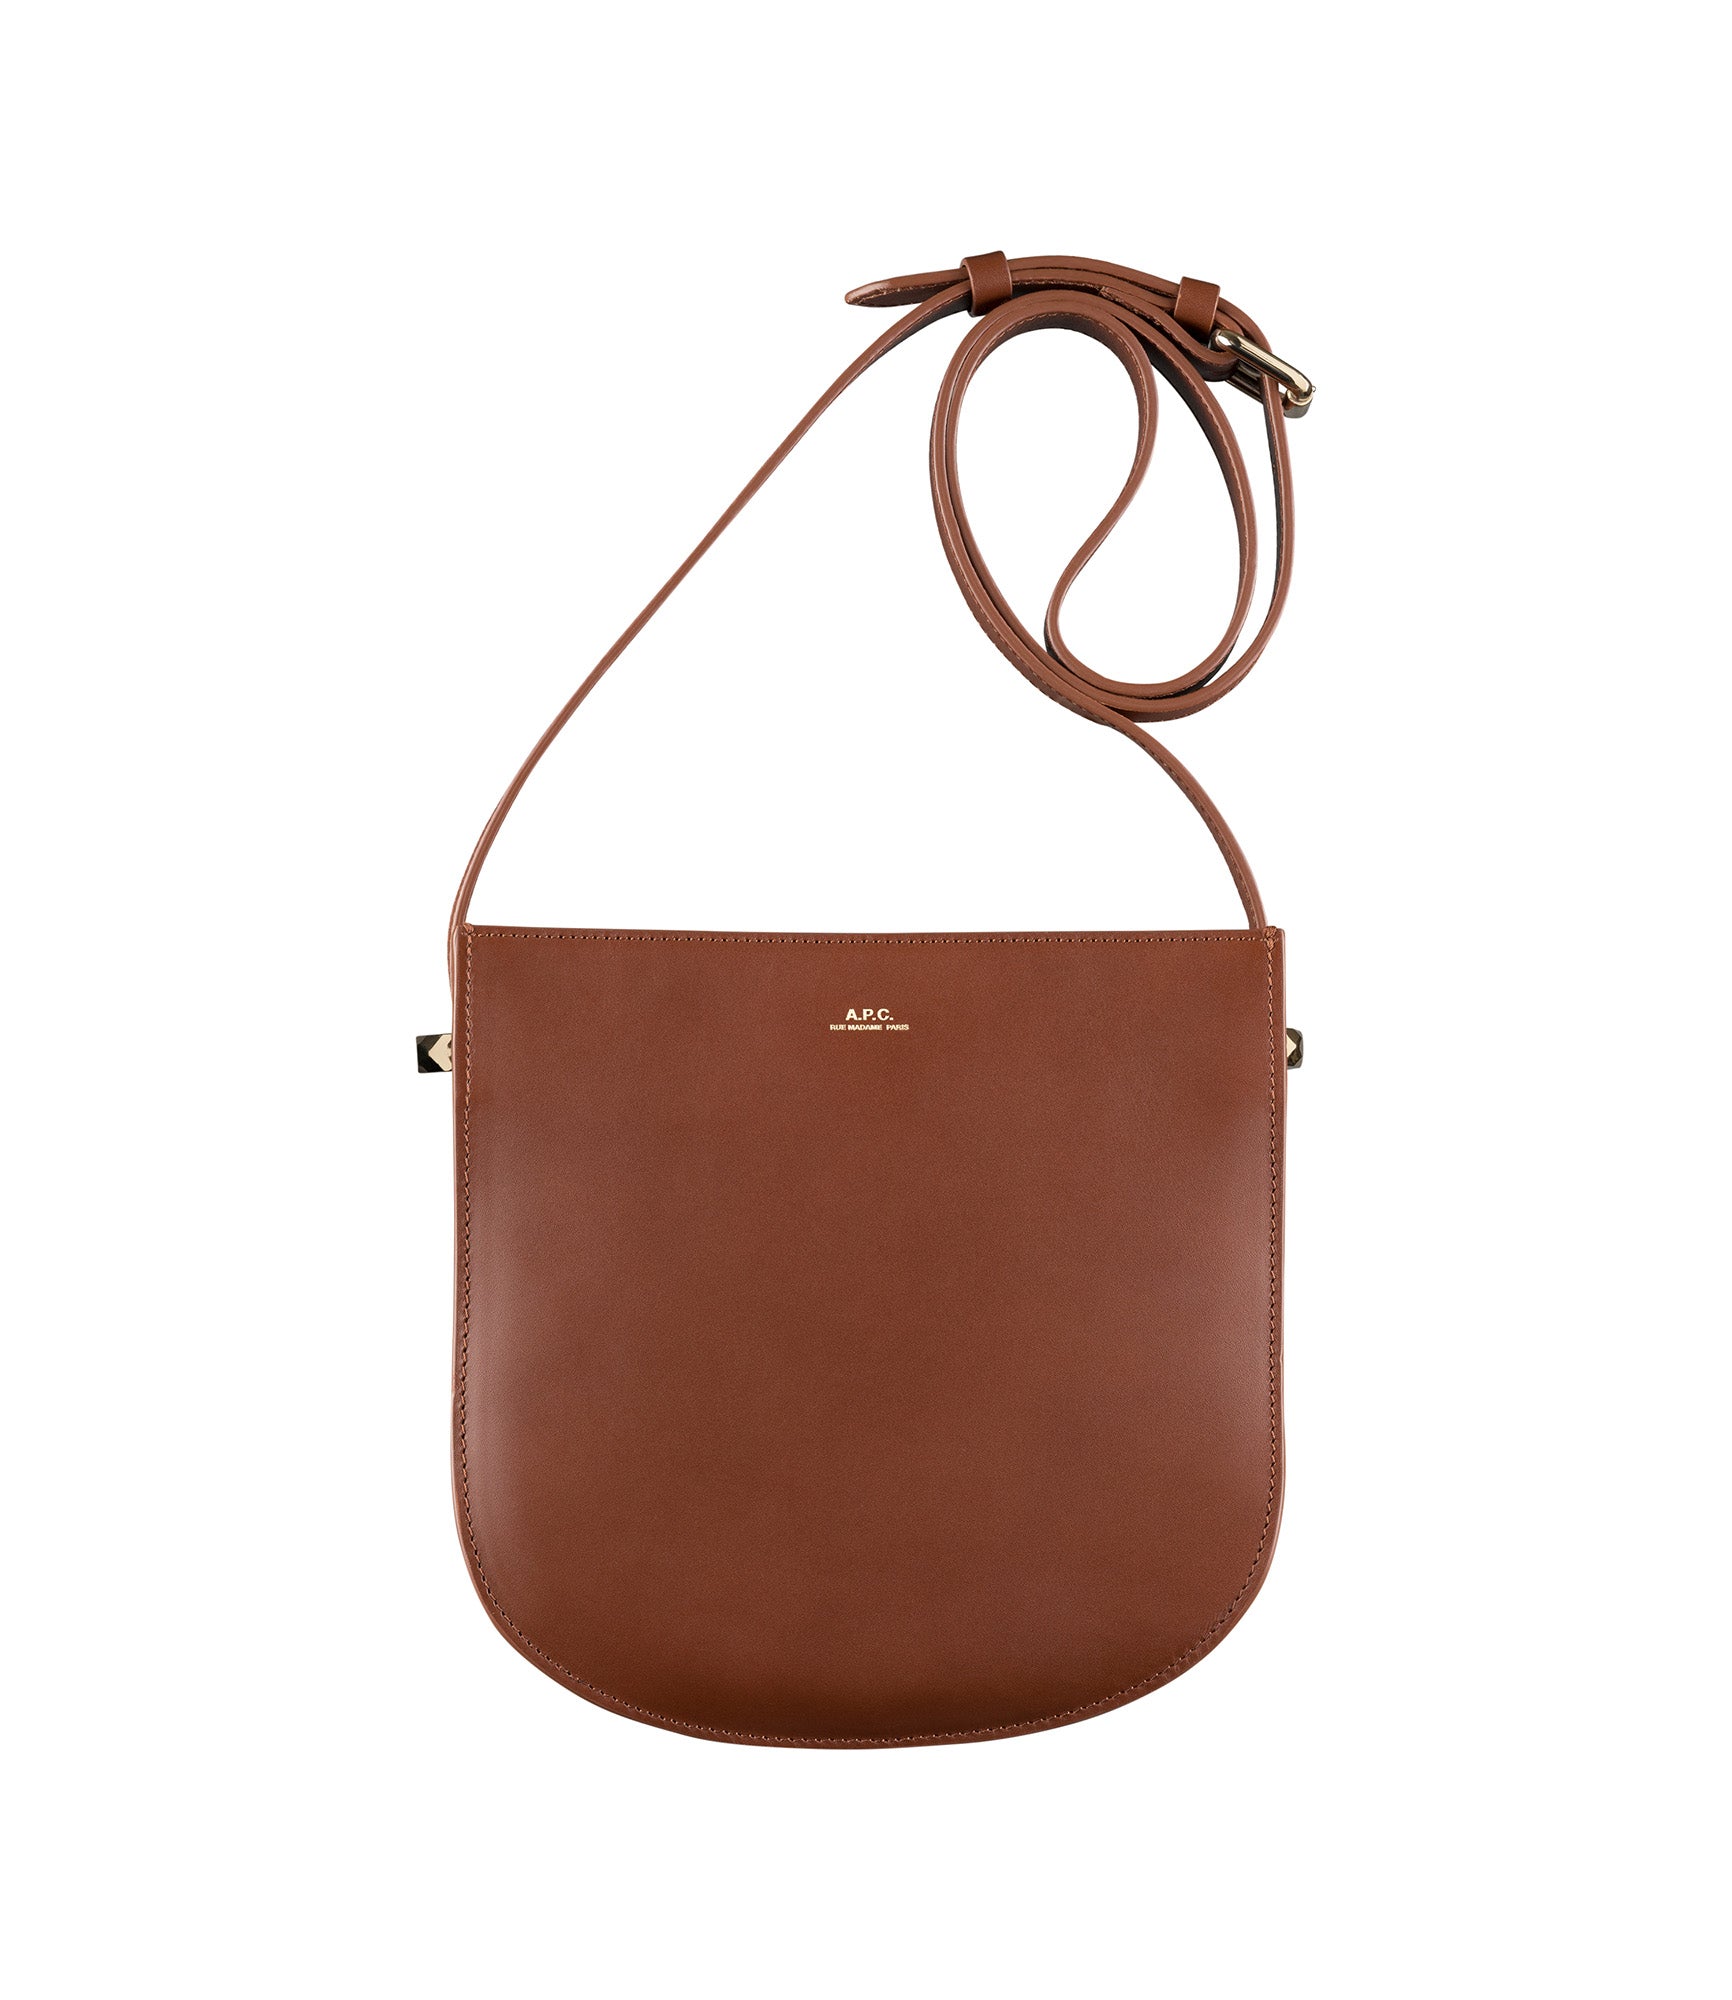 Genève New bag | Shoulder bag in smooth leather. | A.P.C. Accessories